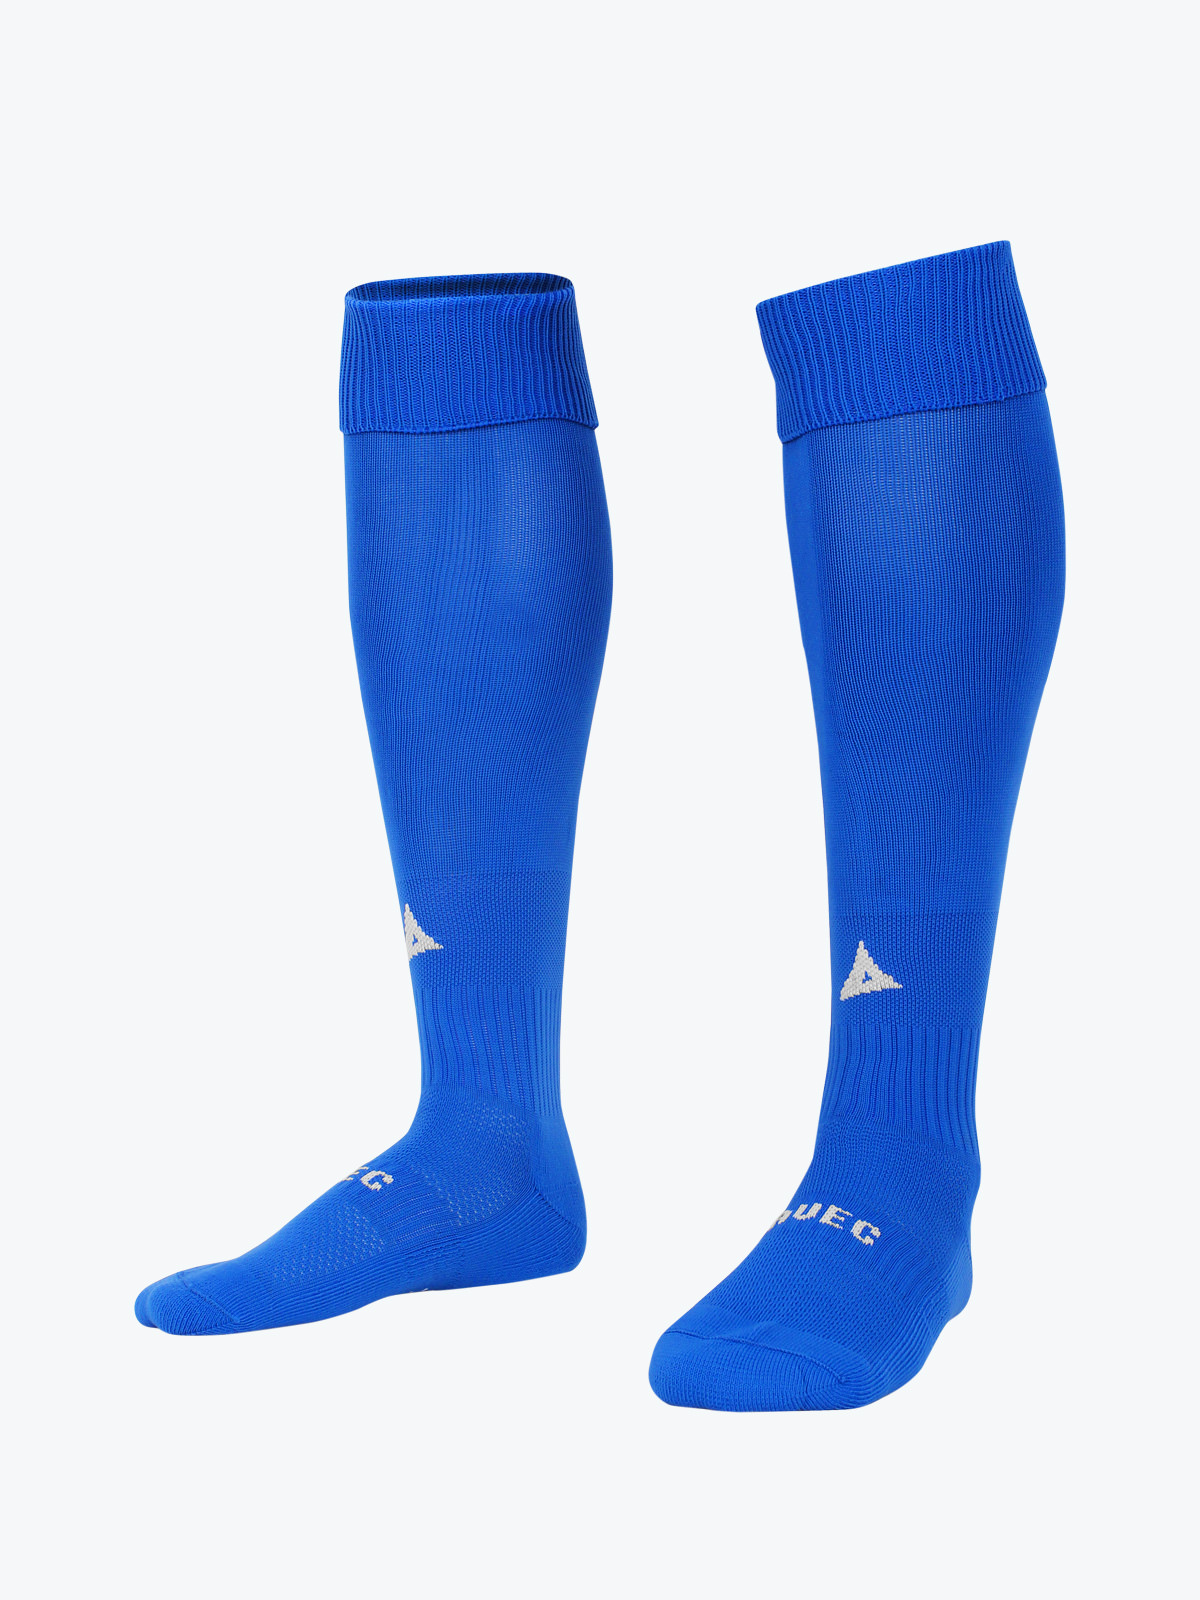 Player Id Jersey Number Socks Over the Calf Length Royal and White 